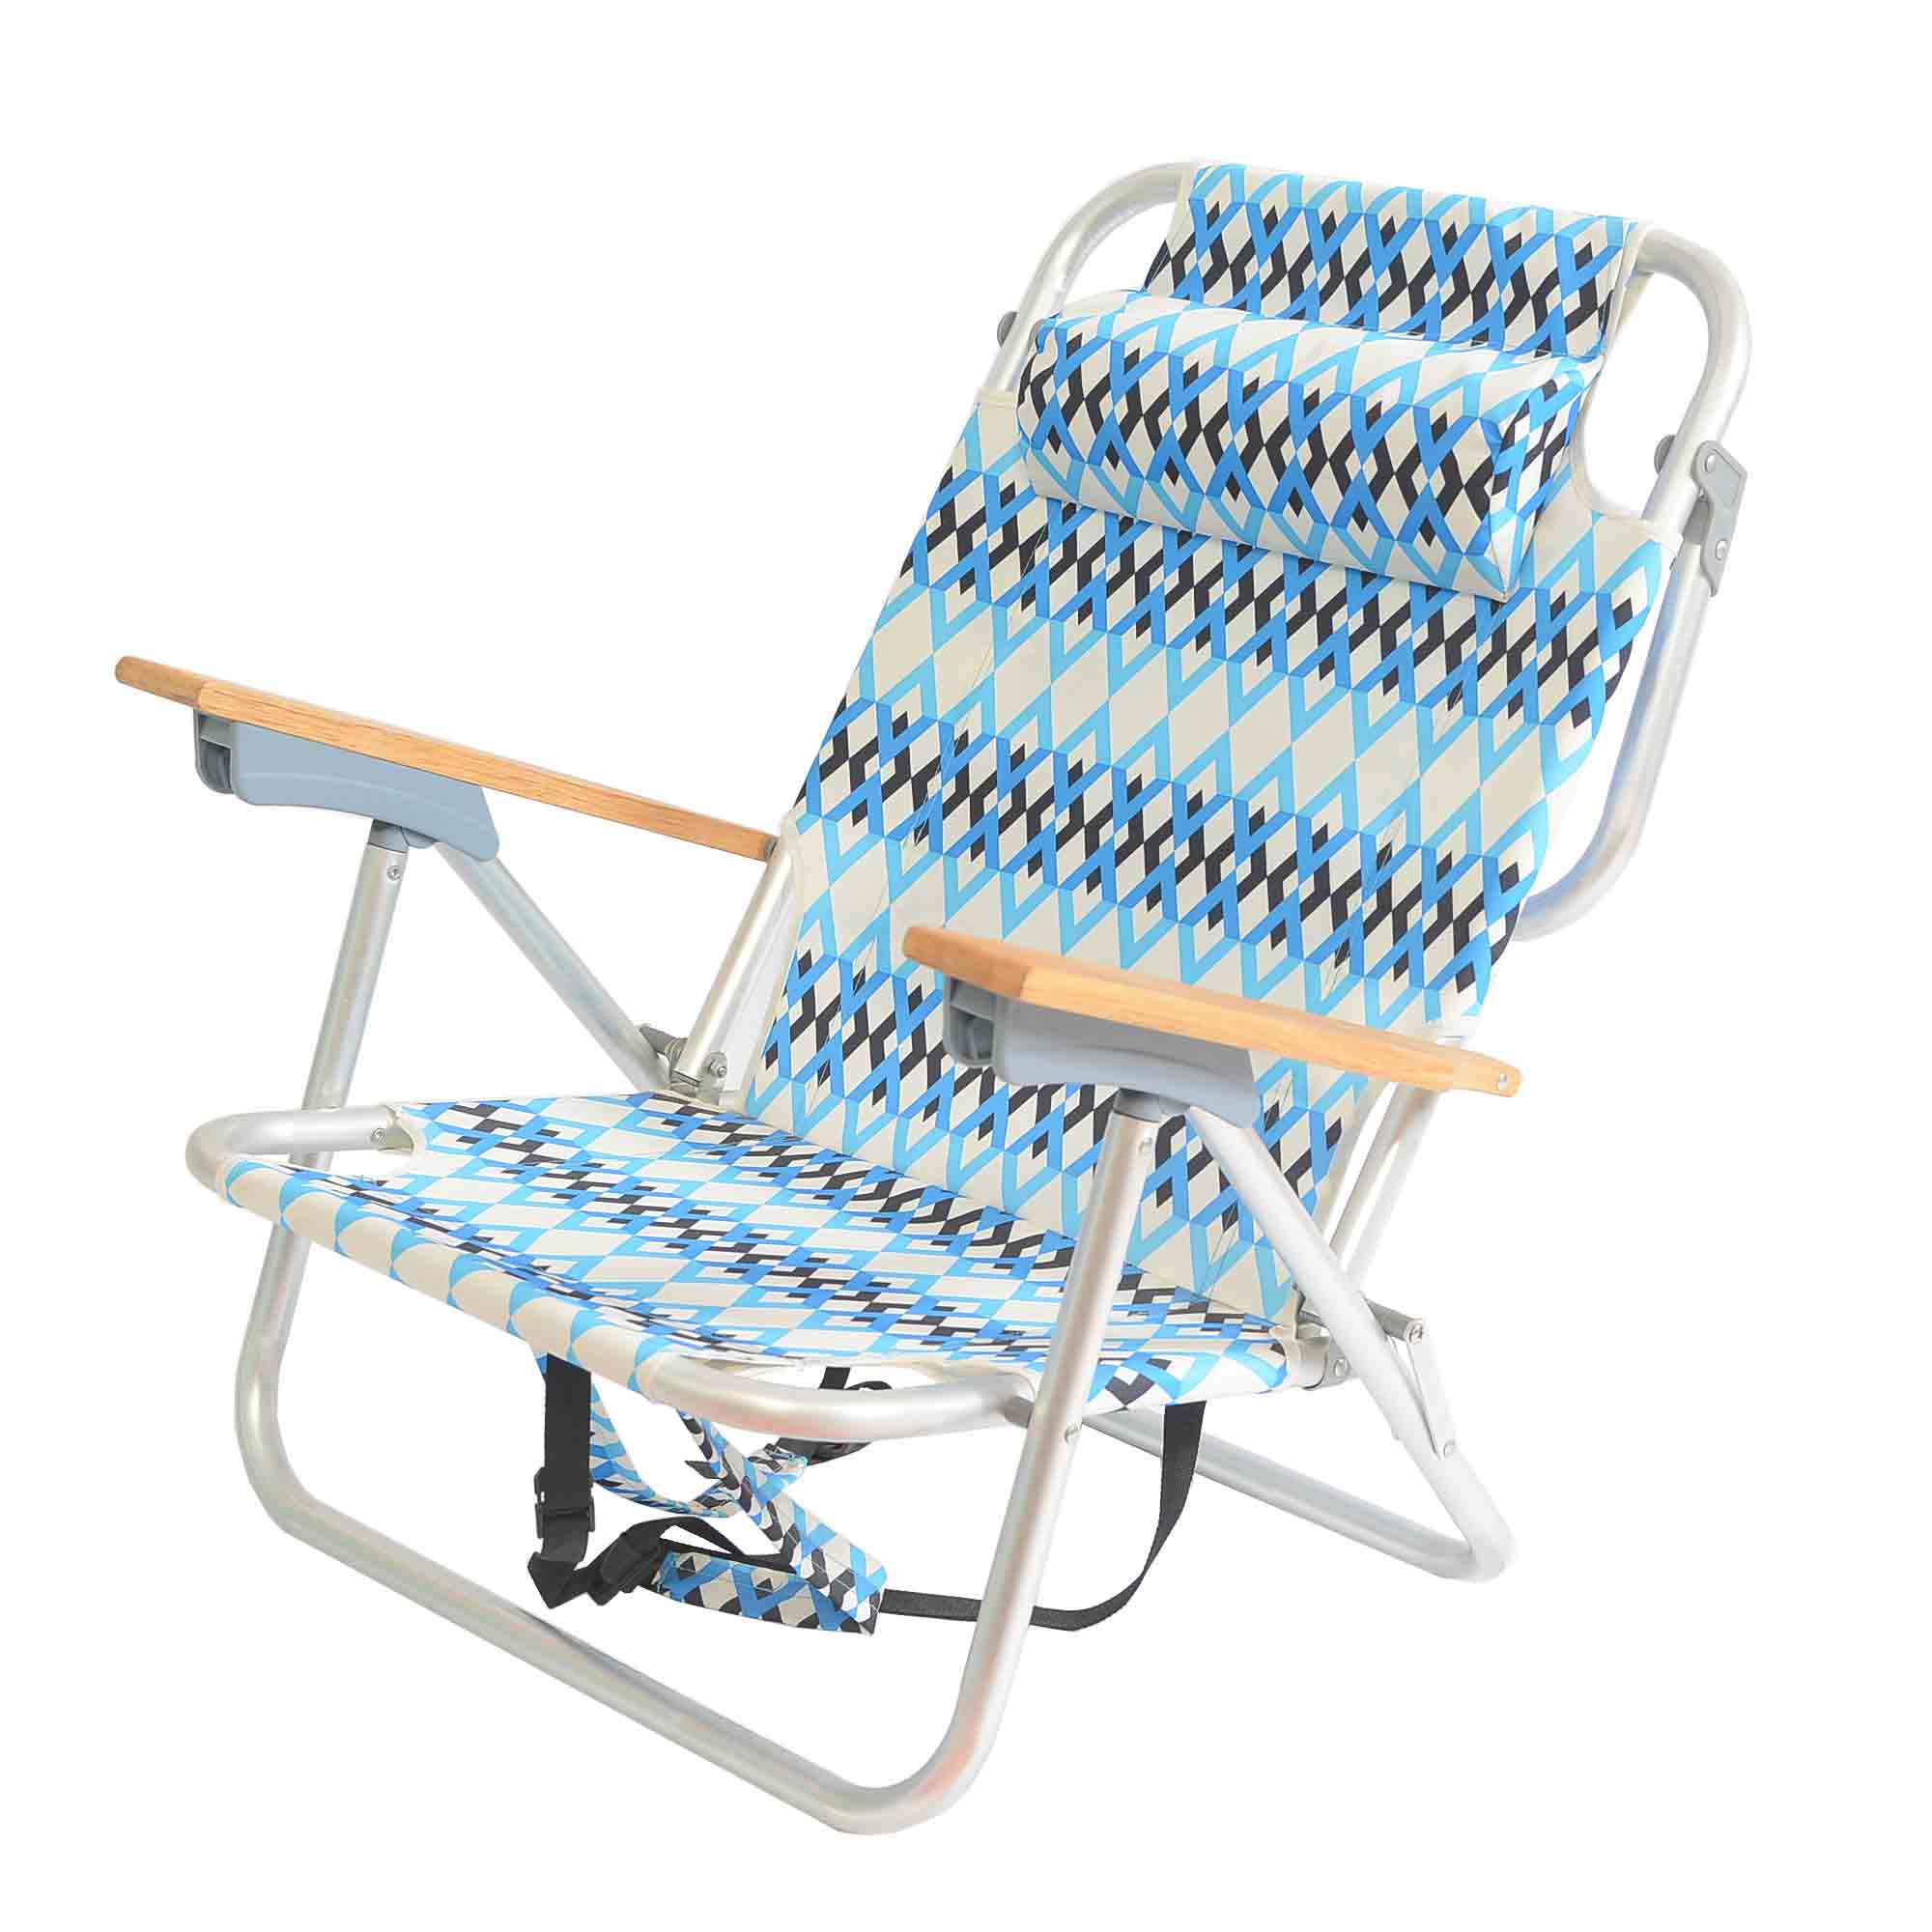 JJLXS-108B Aluminum camping folding chair Featured Image